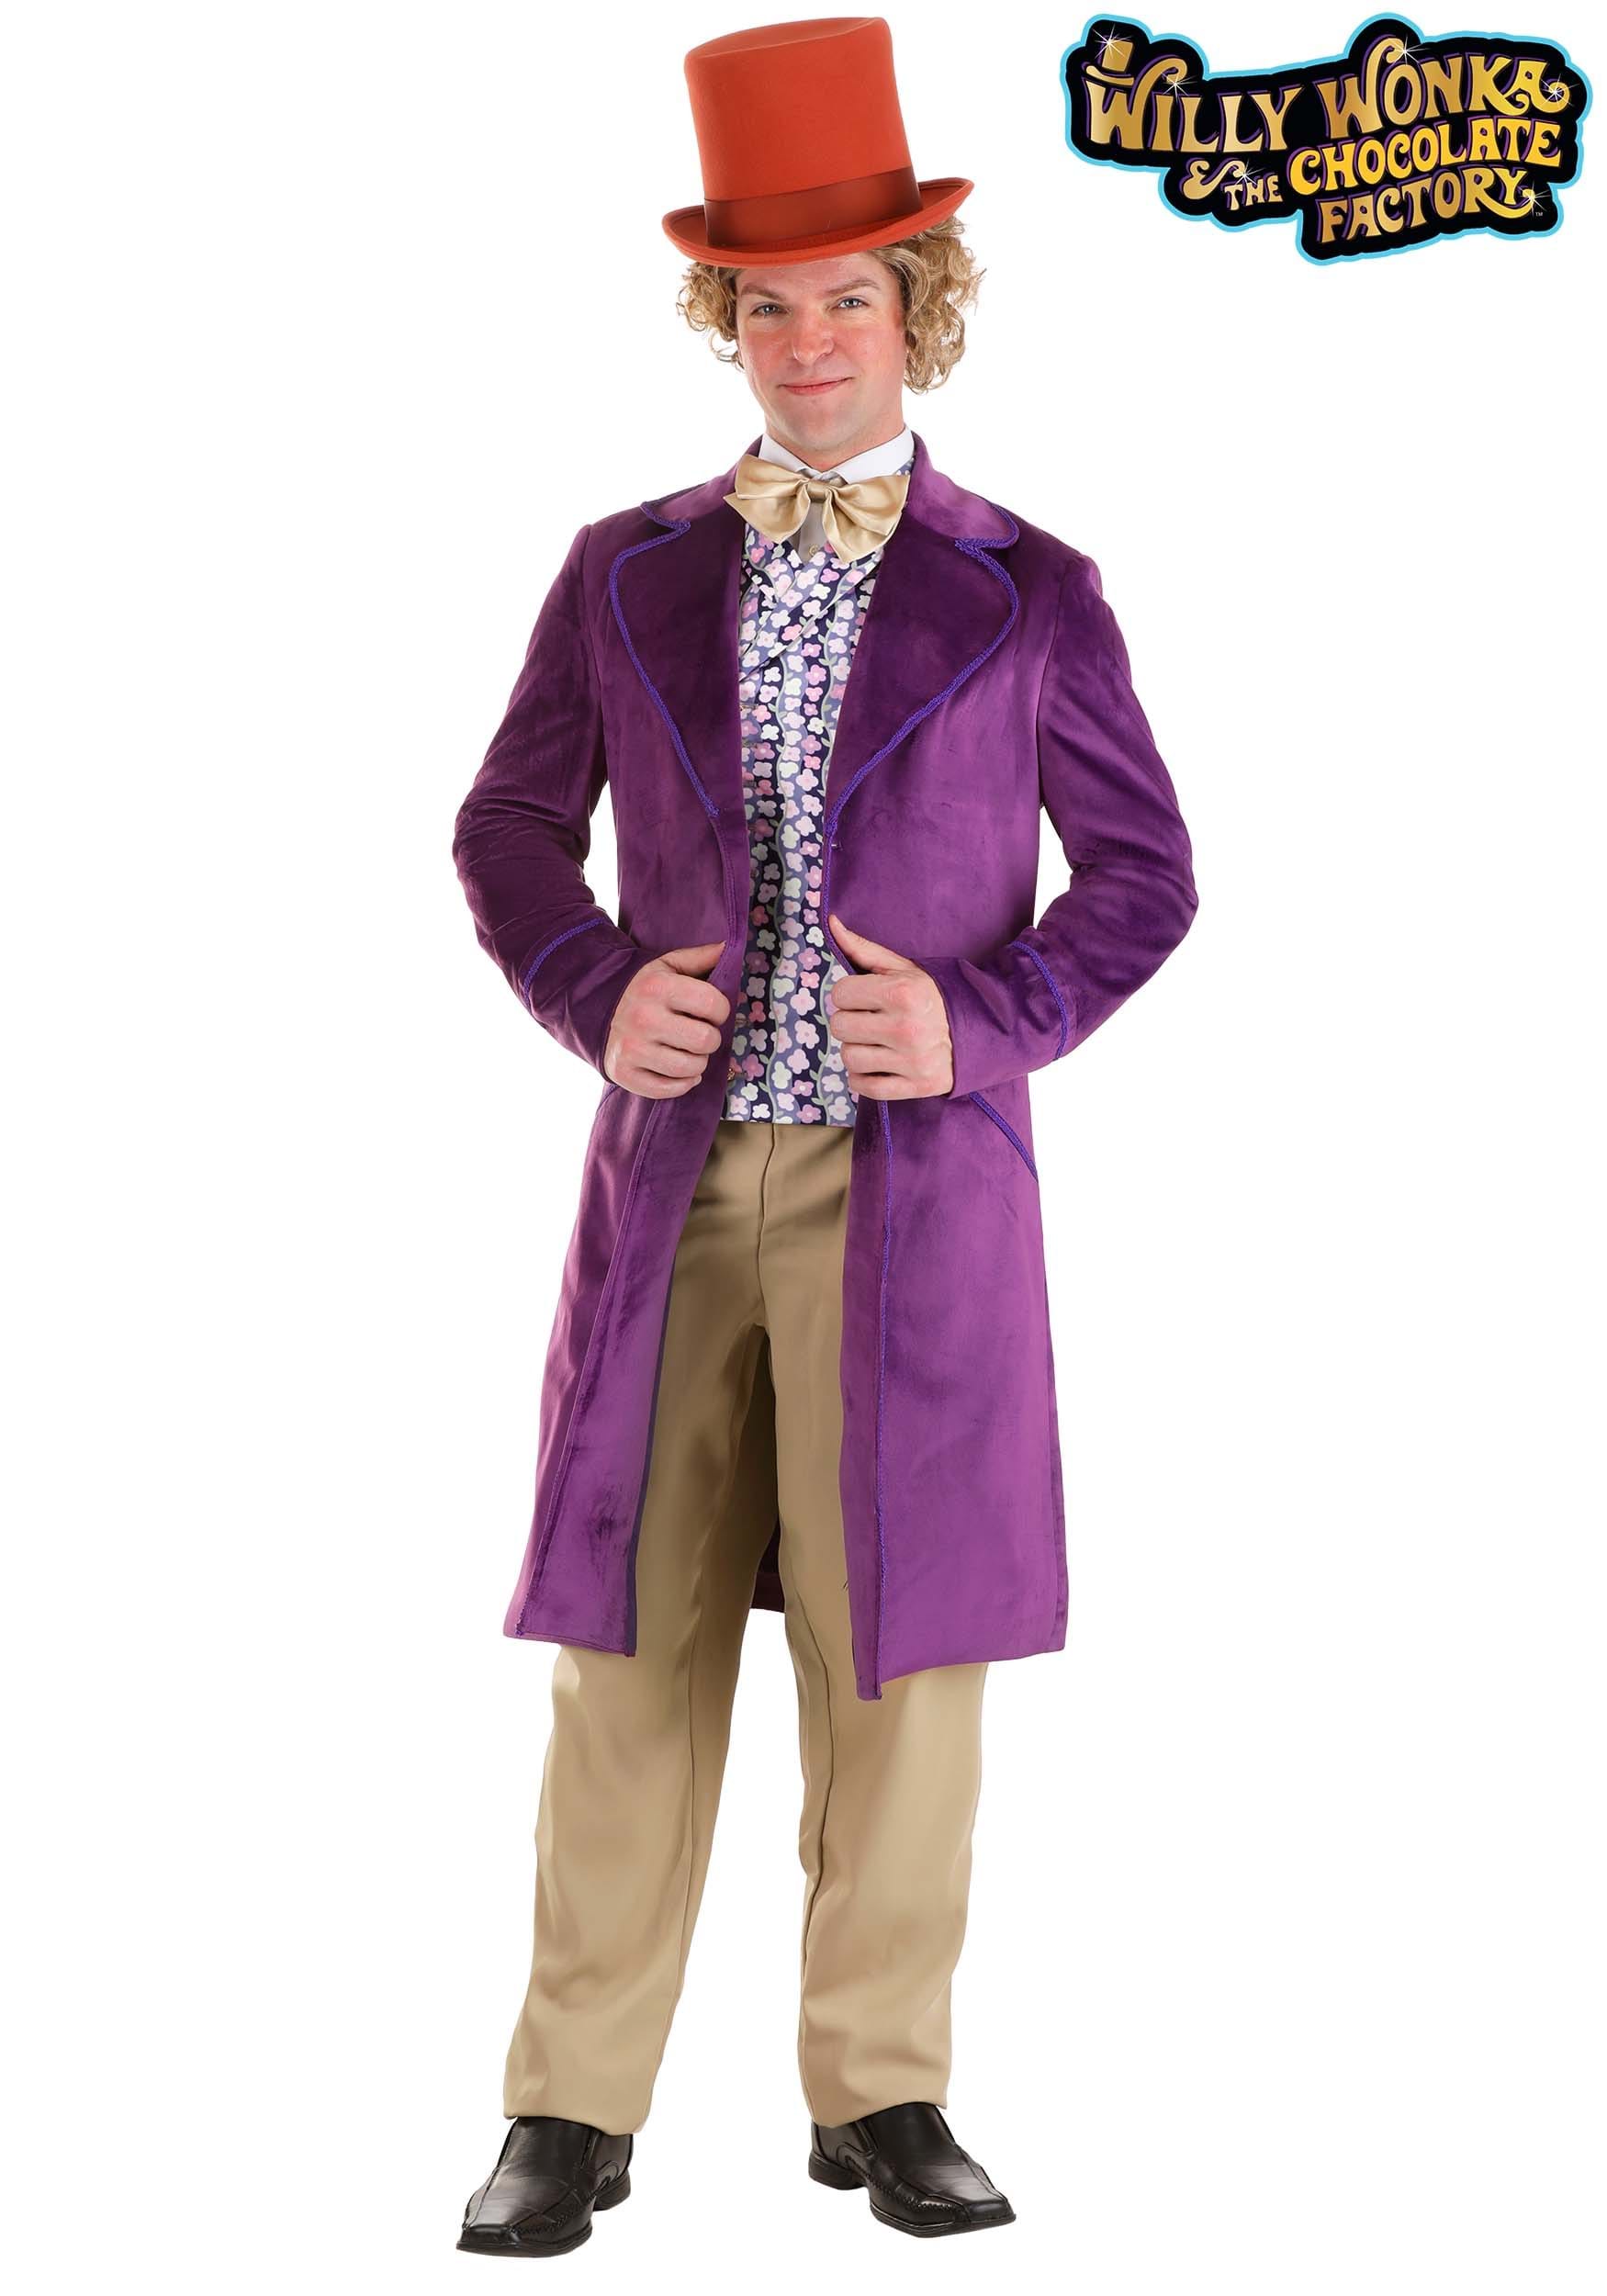 Authentic Willy Wonka Costume Jacket for Men